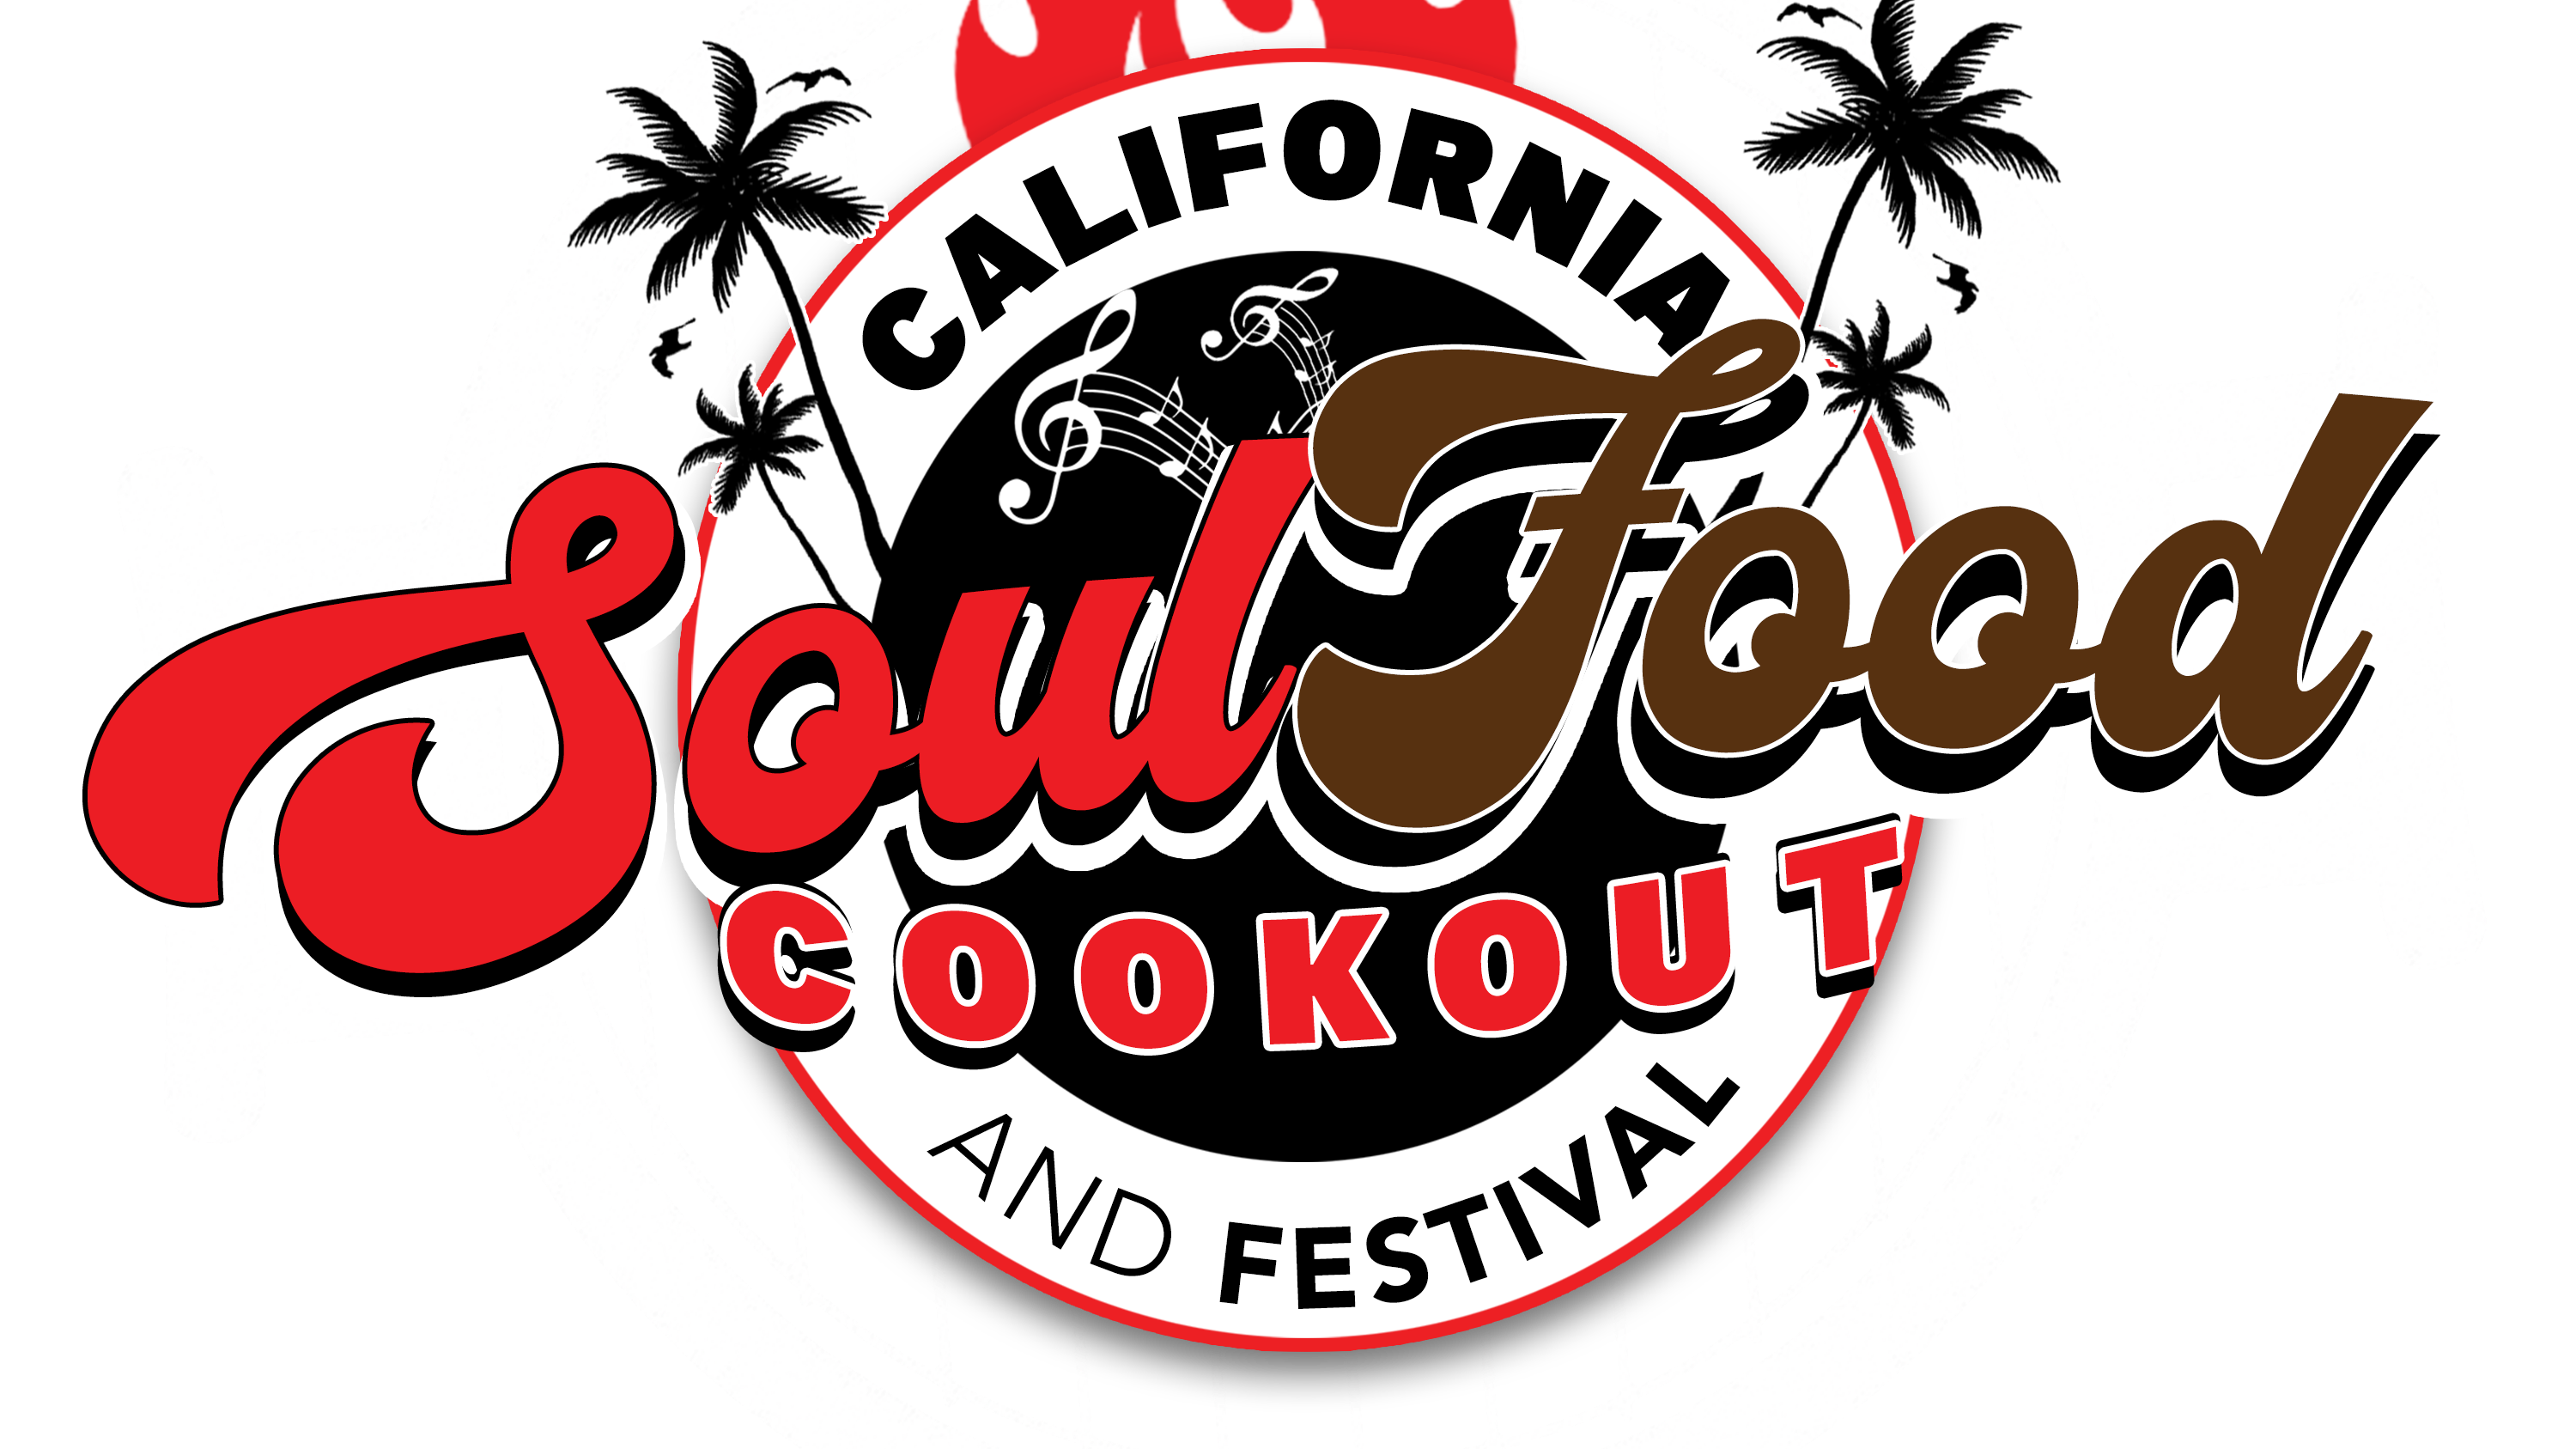 California Soul Food Cookout and Festival to Benefit Regional Charities 10